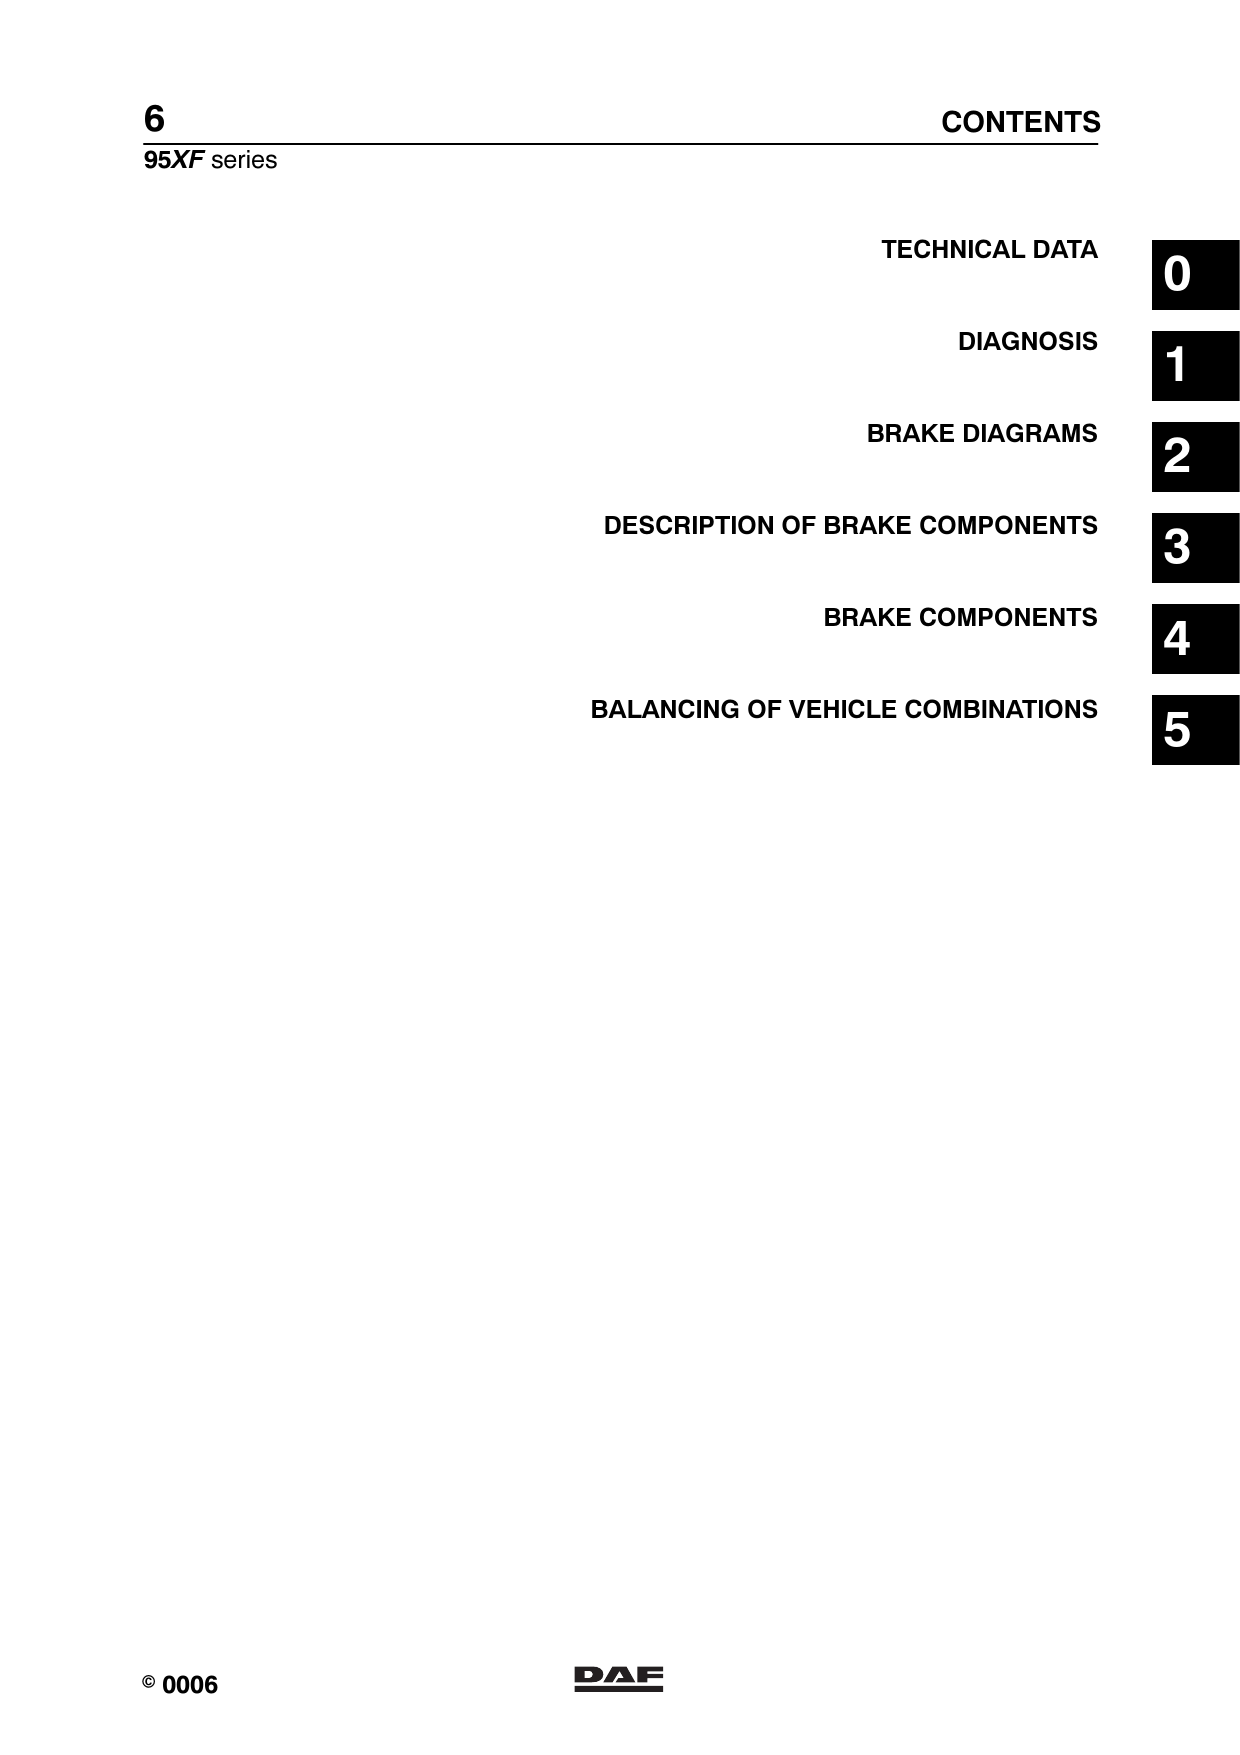 2003-2006 DAF 95 XF truck manual Preview image 6